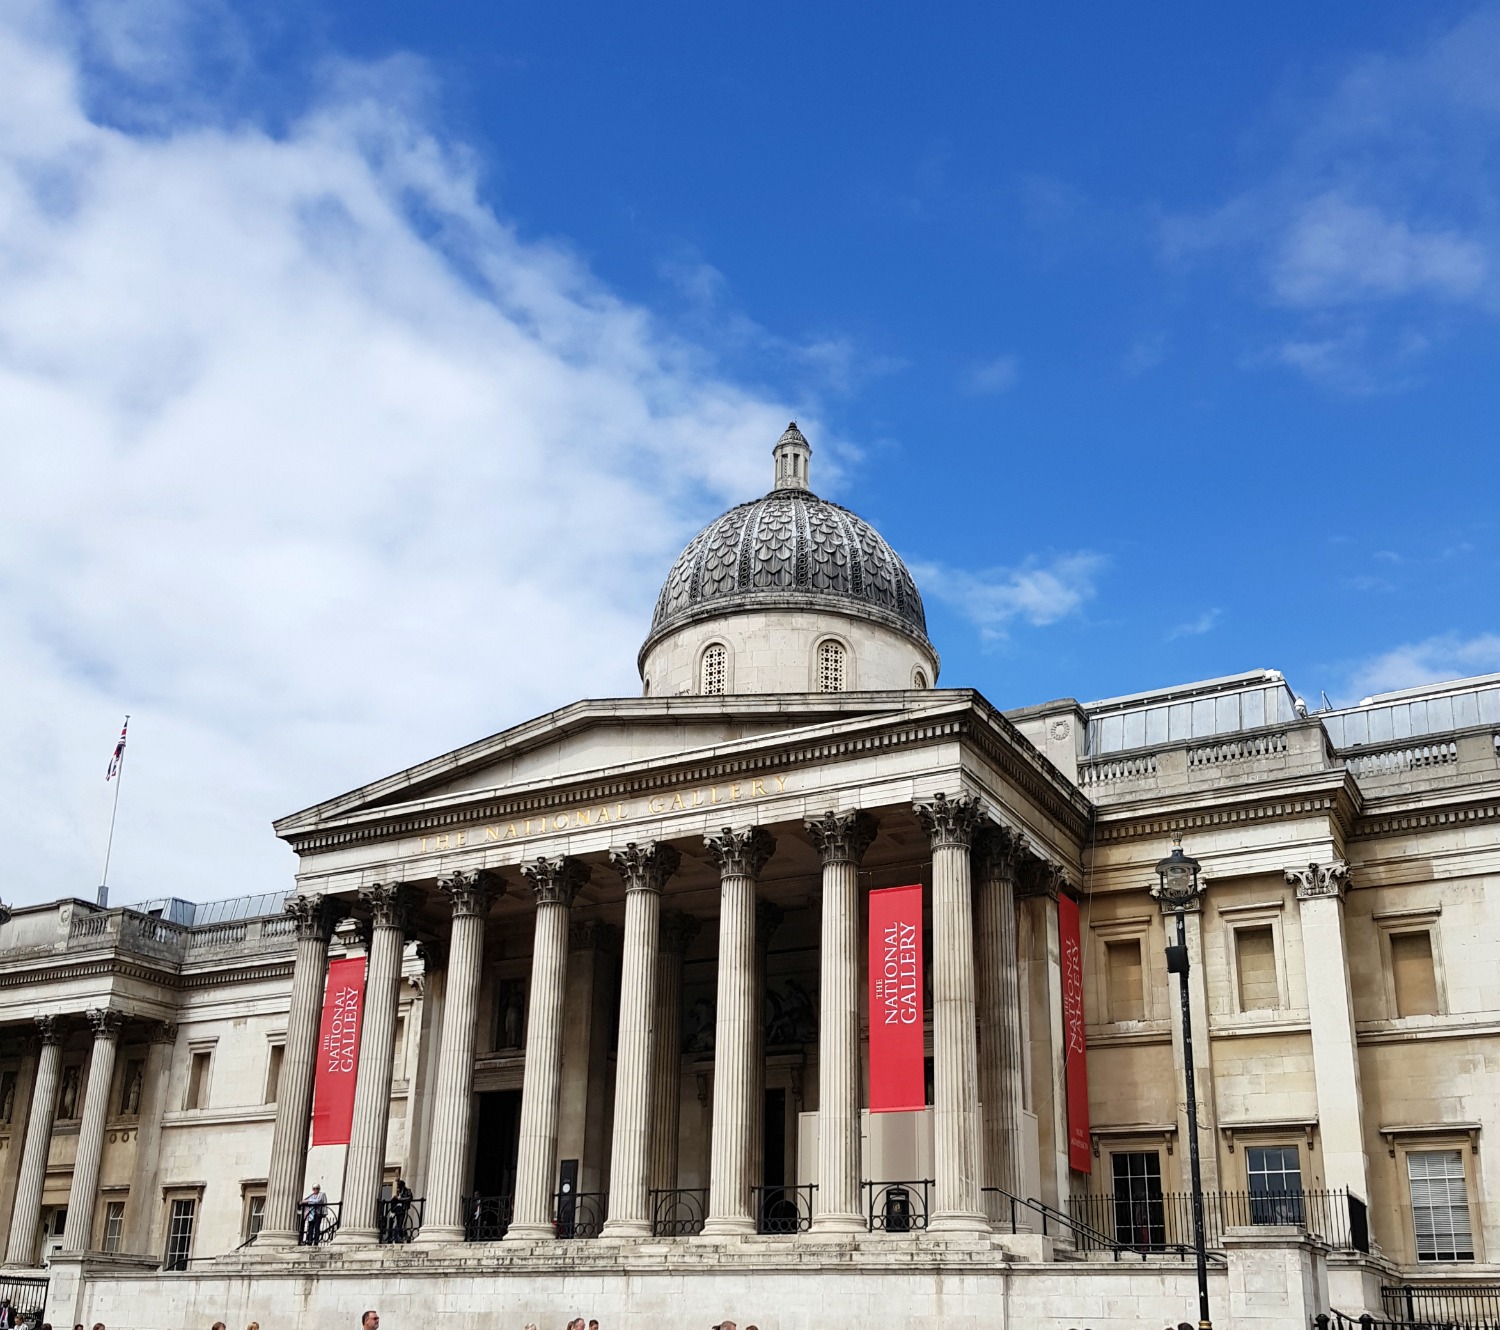 The exterior of the National Gallery in London, seen from Trafalgar Square against a blue sky - my ultimate guide to London's museums and tips for London museums with toddlers and kids